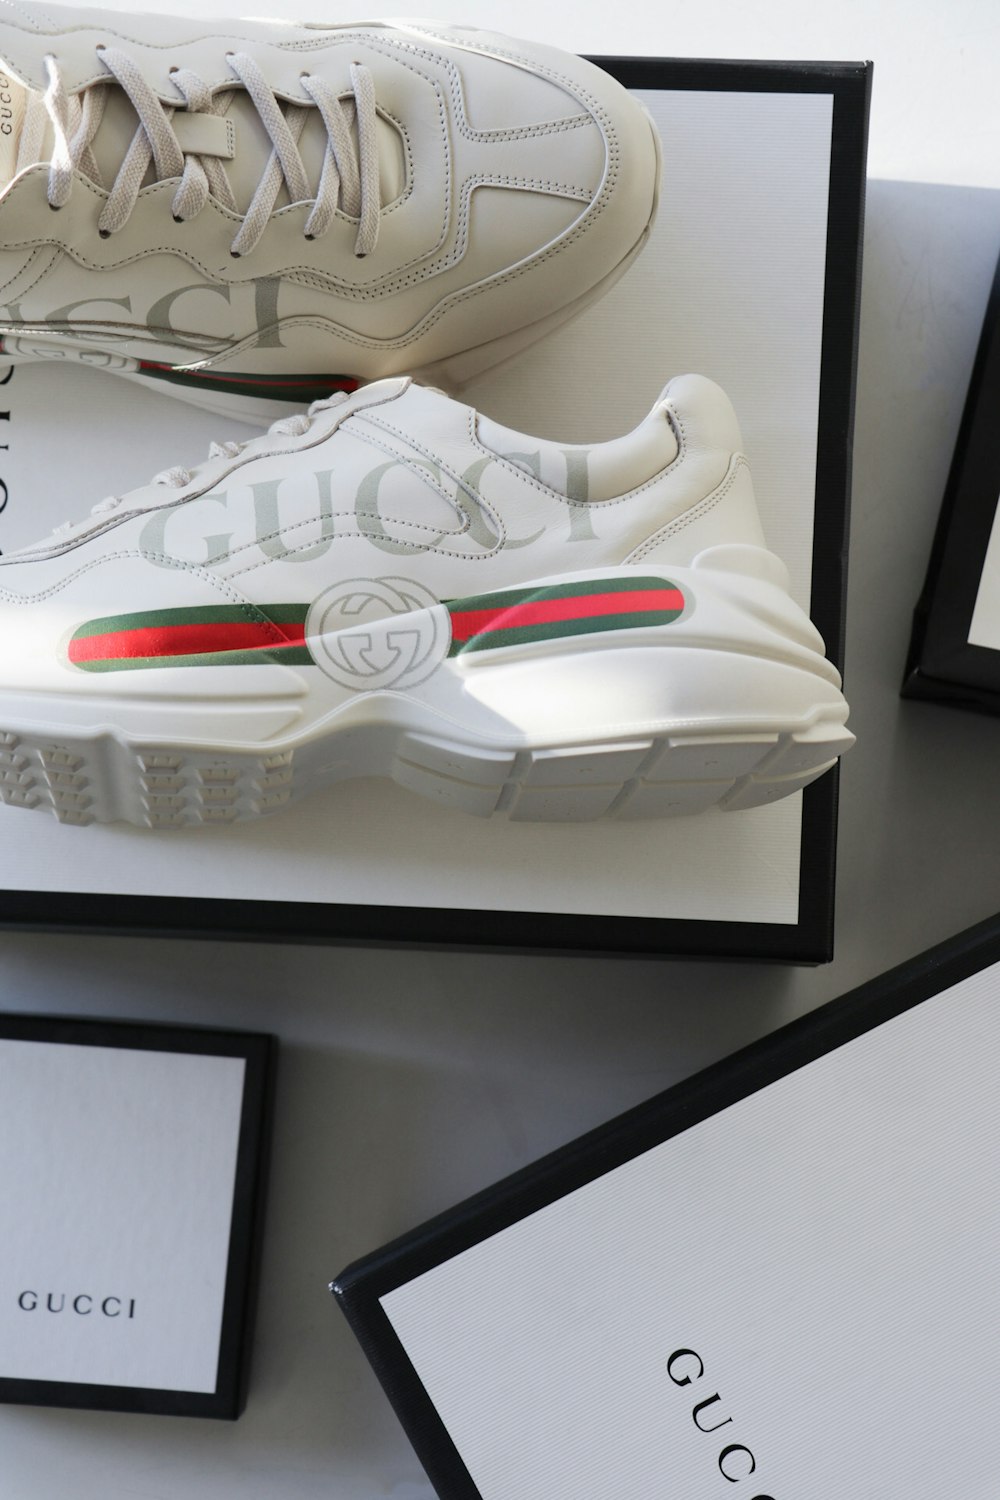 Pair of gucci sneakers with box photo – Free Image on Unsplash